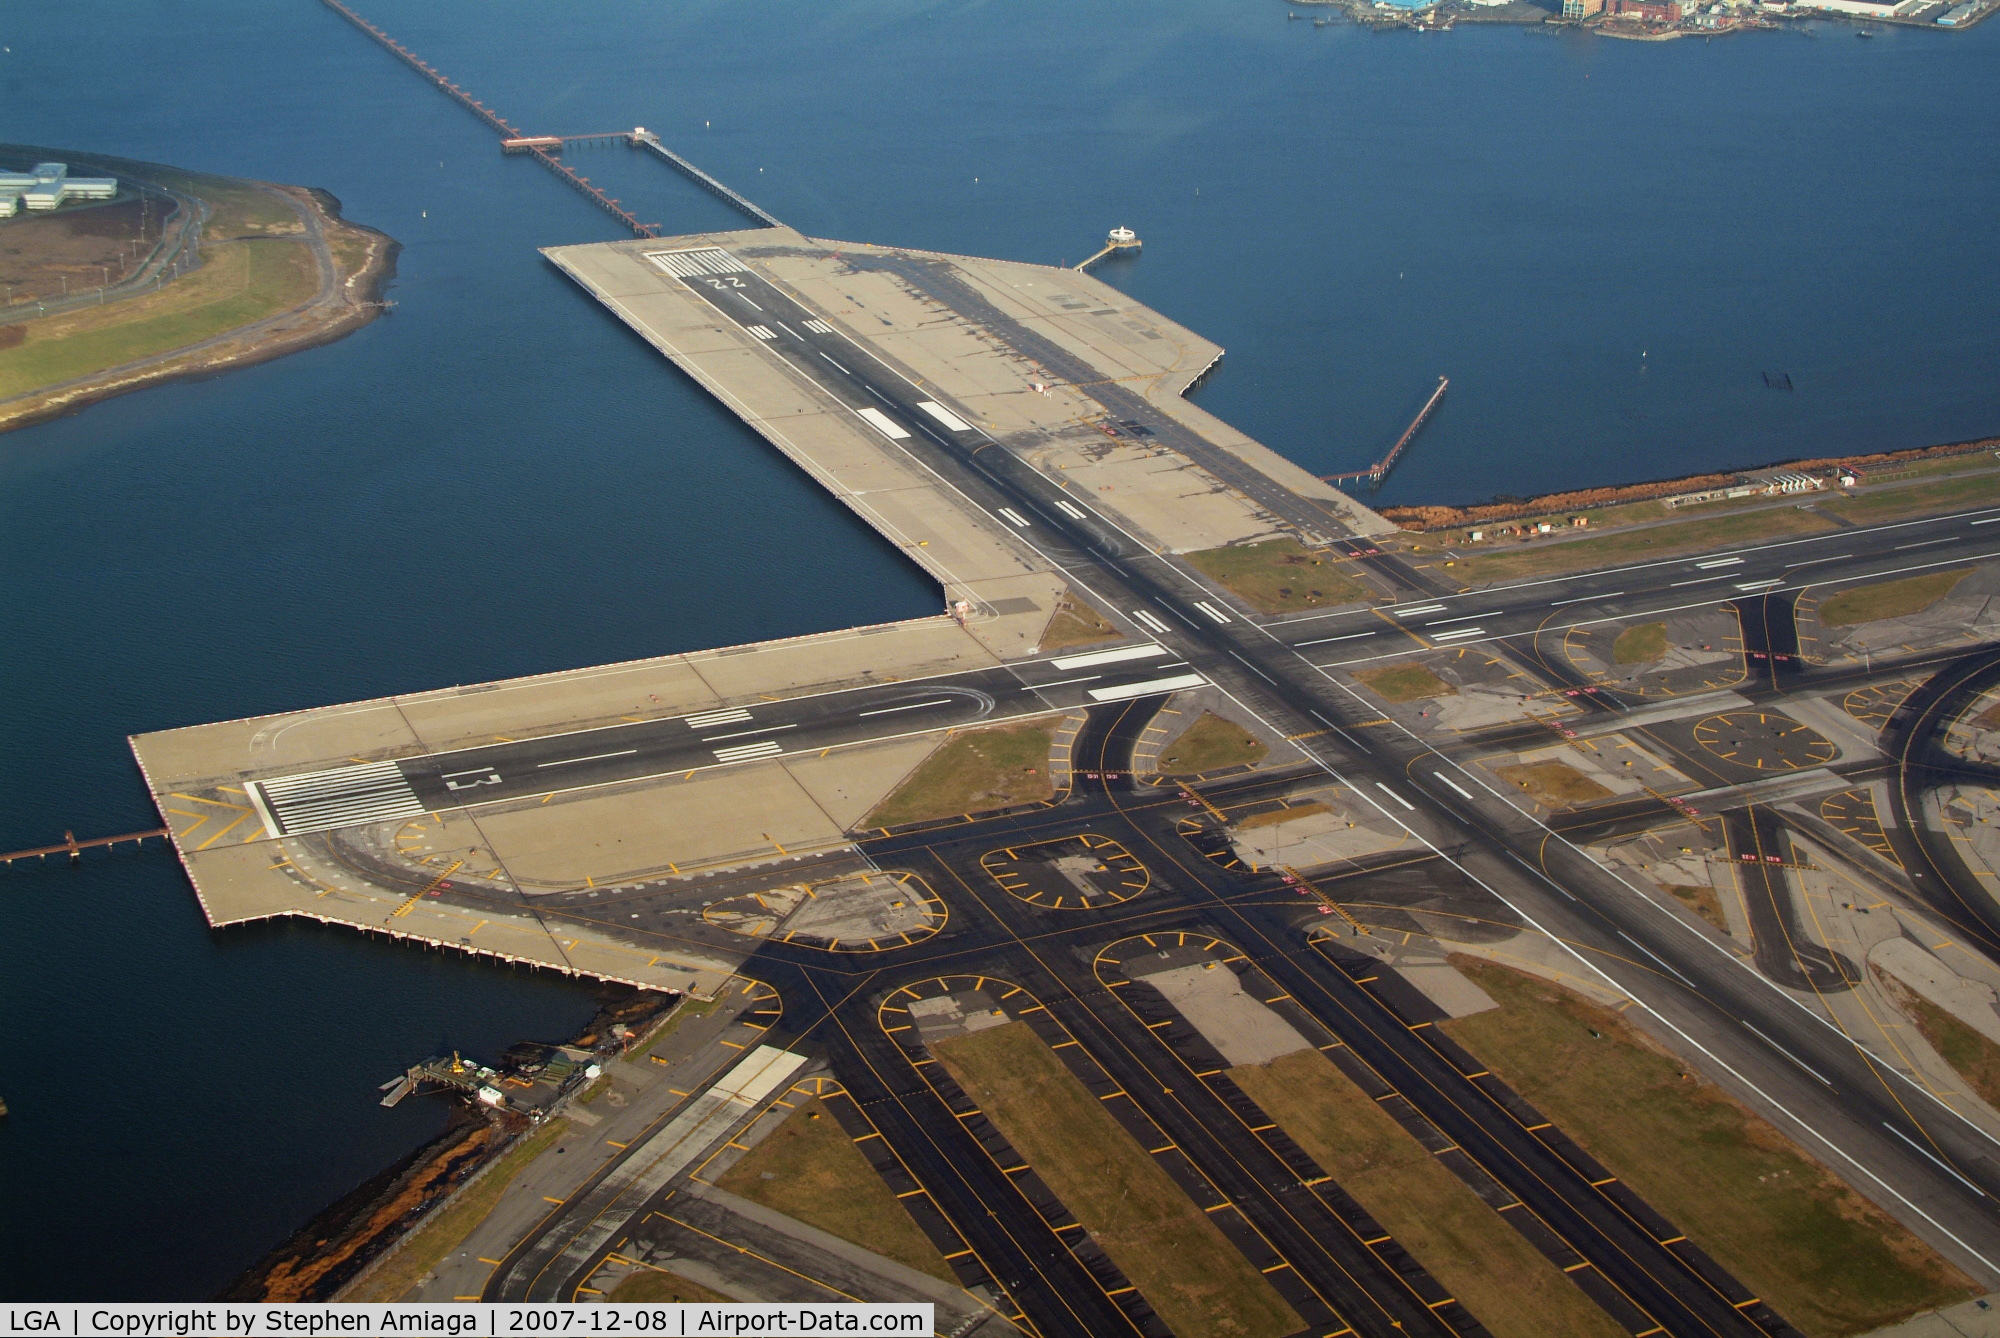 La Guardia Airport (LGA) - The business end without all the traffic